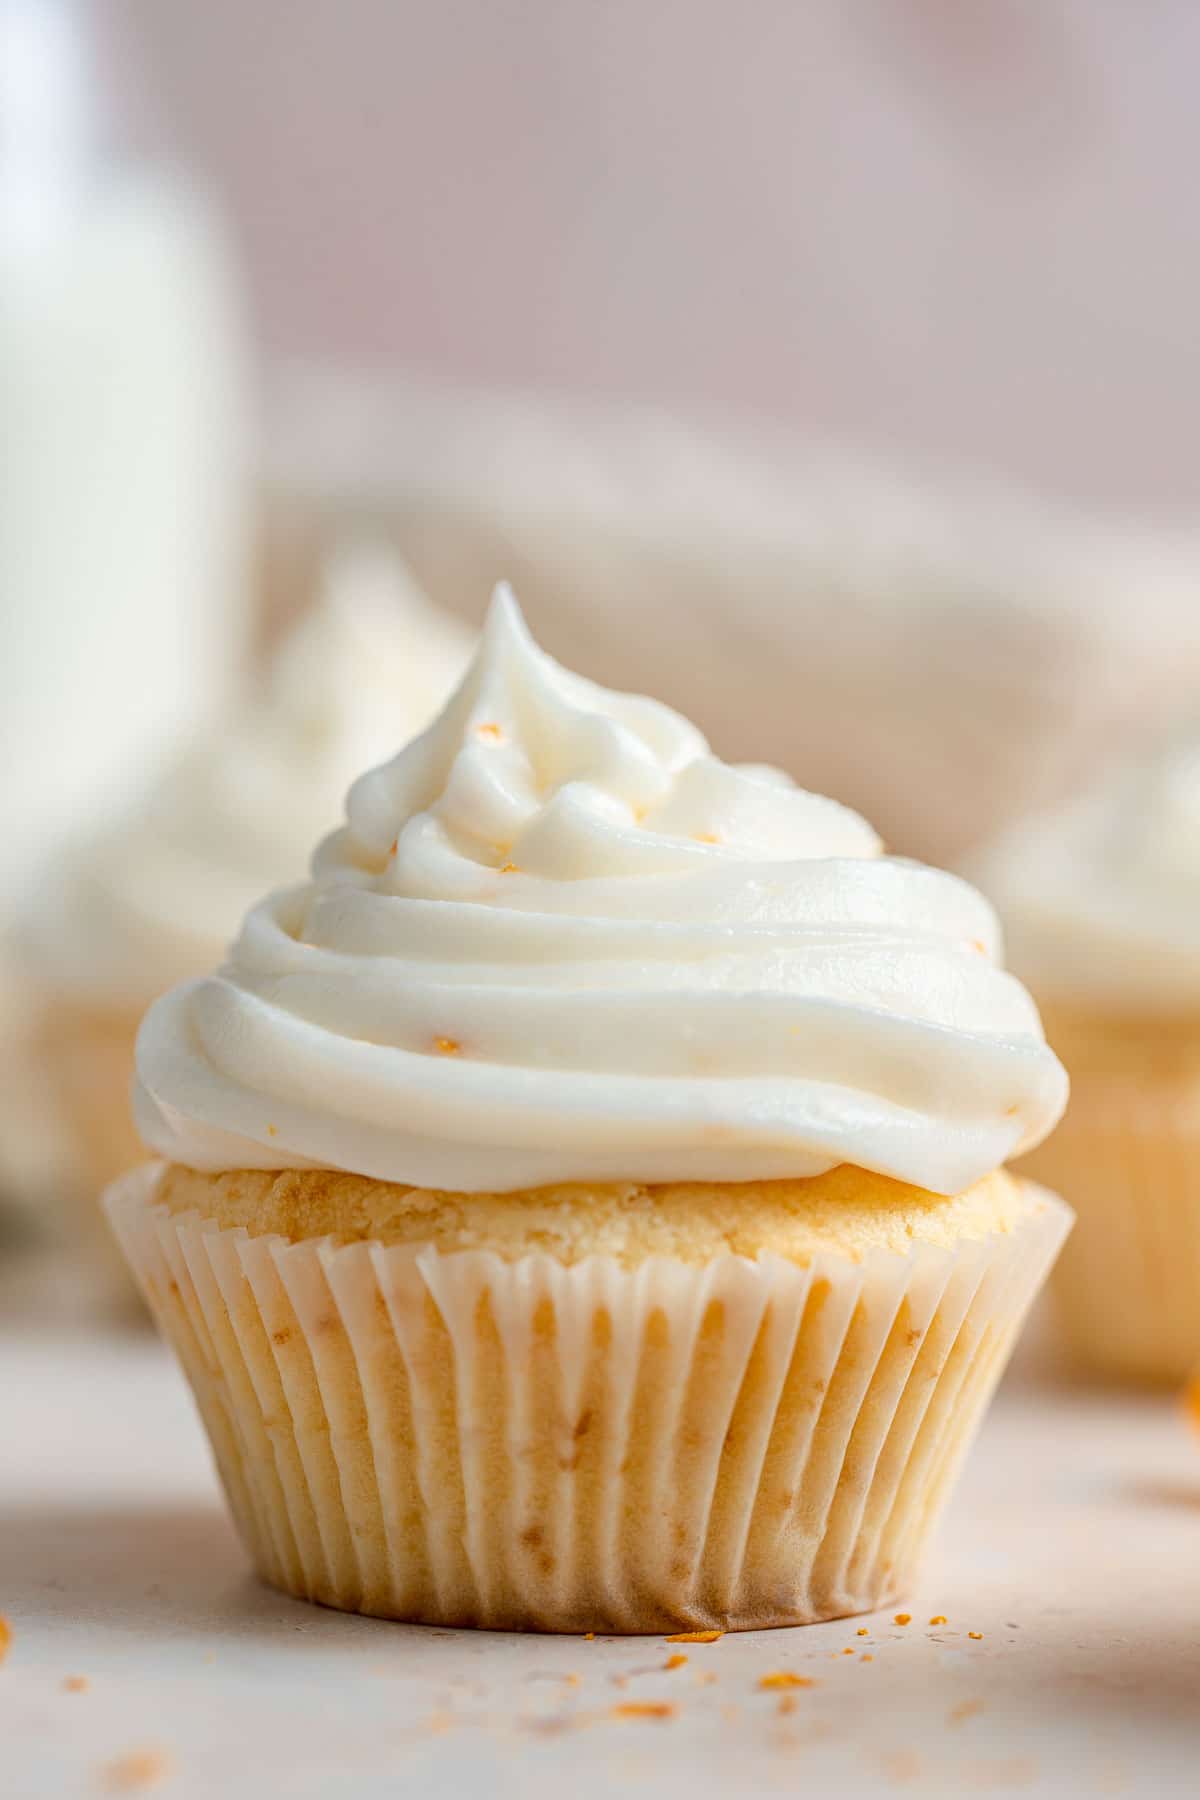 Ricotta icing recipe whipped into frosting piped on cupcake.